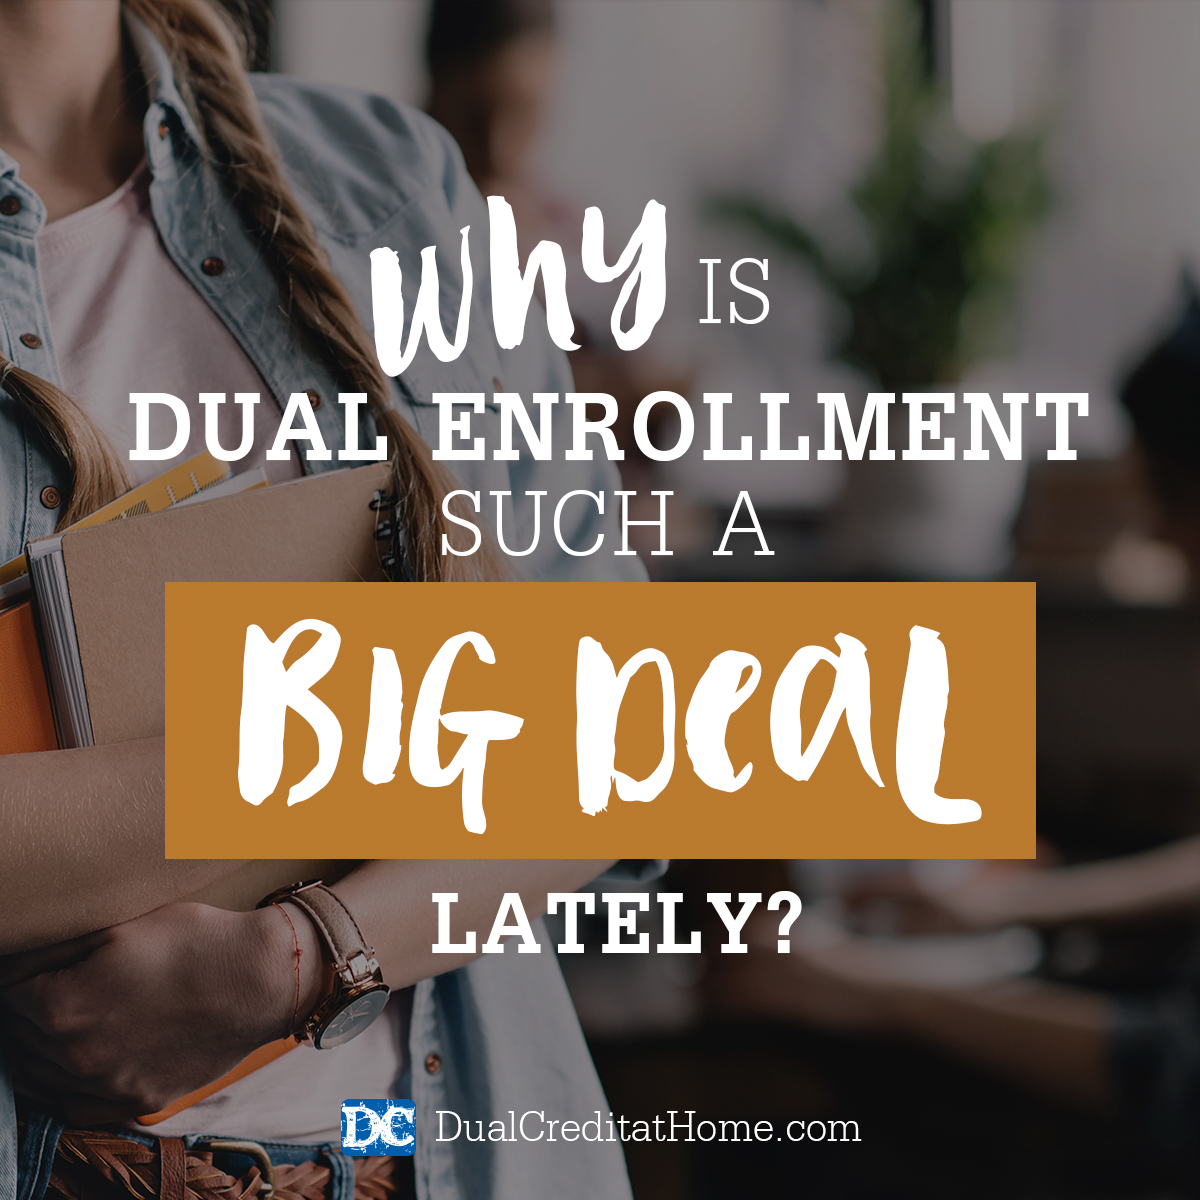 Why is Dual Enrollment Such a Big Deal Lately?